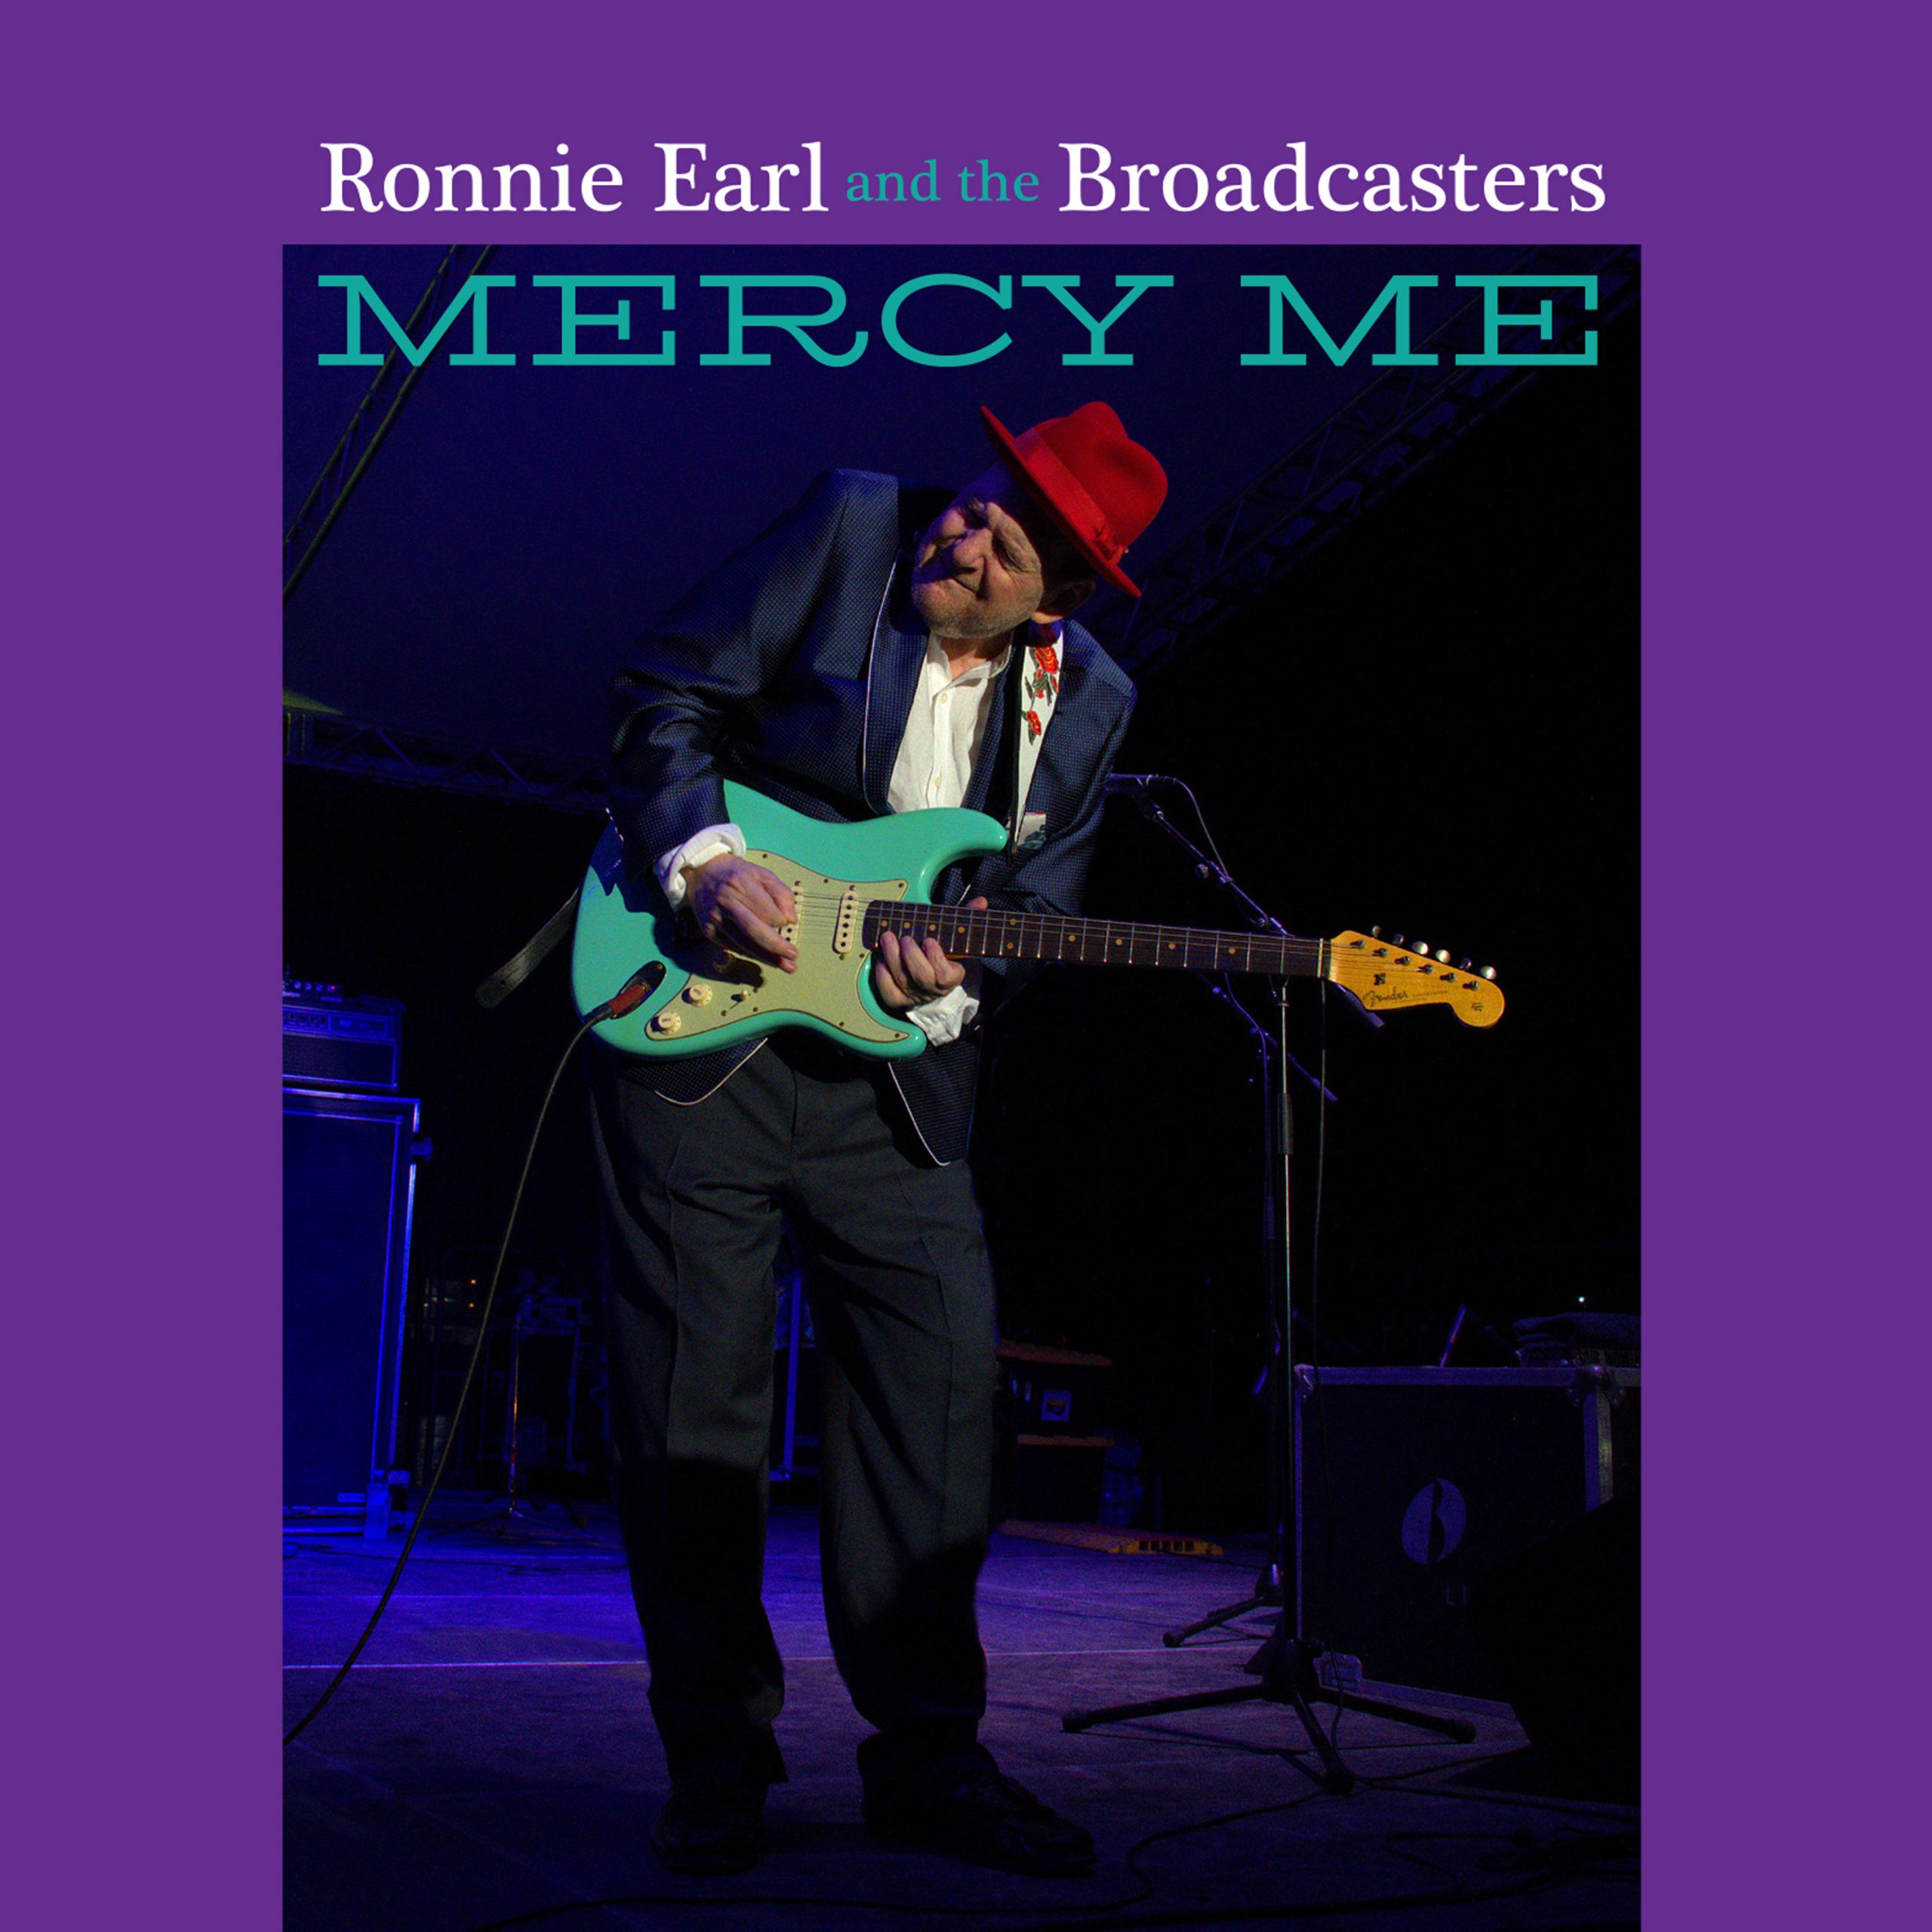 Ronnie Earl & The Broadcasters Deliver a Loud and Clear Shout-Out of Mercy Me On New Stony Plain Records Album Coming April 15